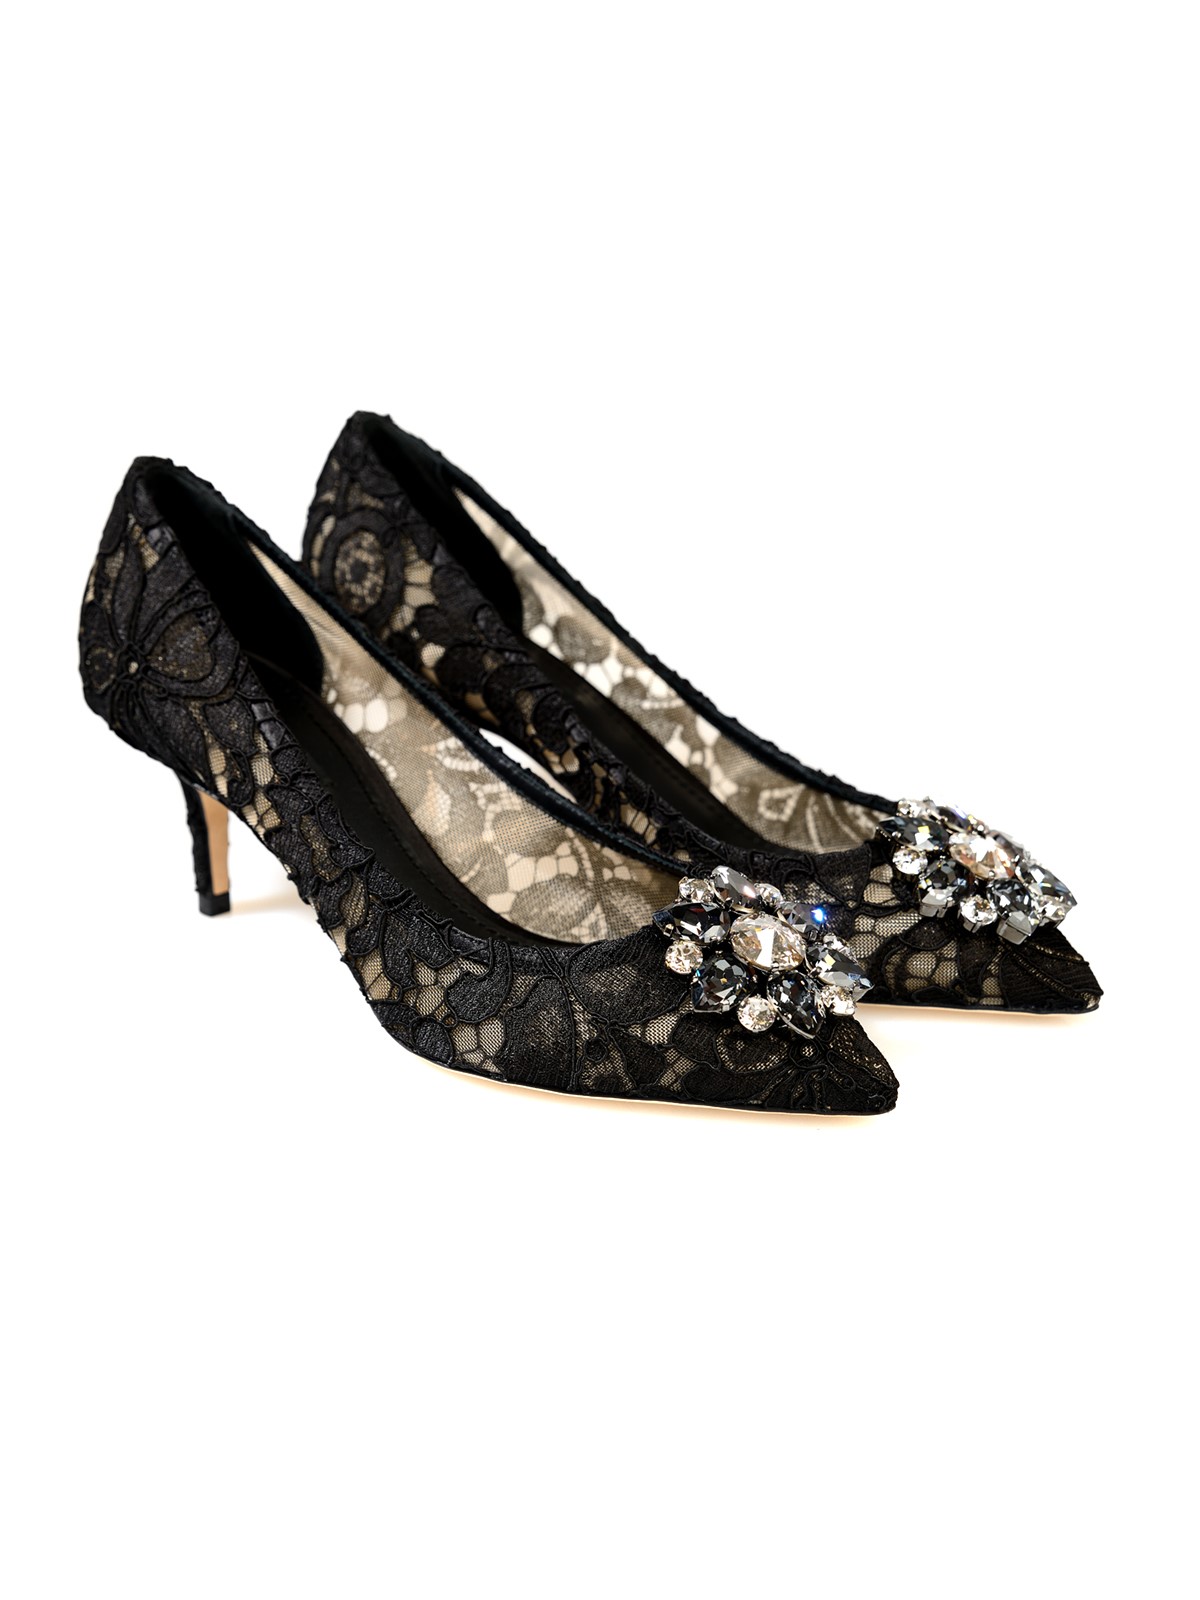 dolce \u0026 gabbana LACE SHOES available on 